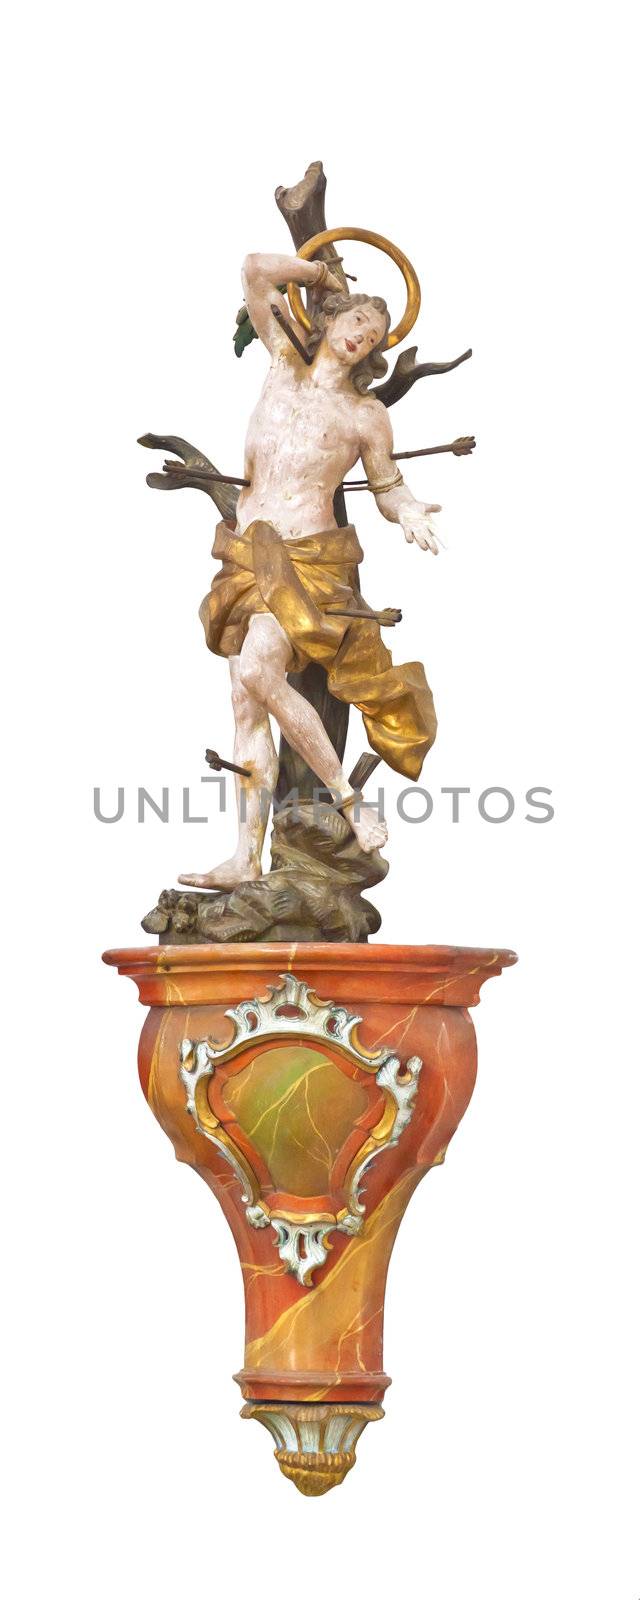 An image of a beautiful Sebastian sculpture in a church in bavaria germany